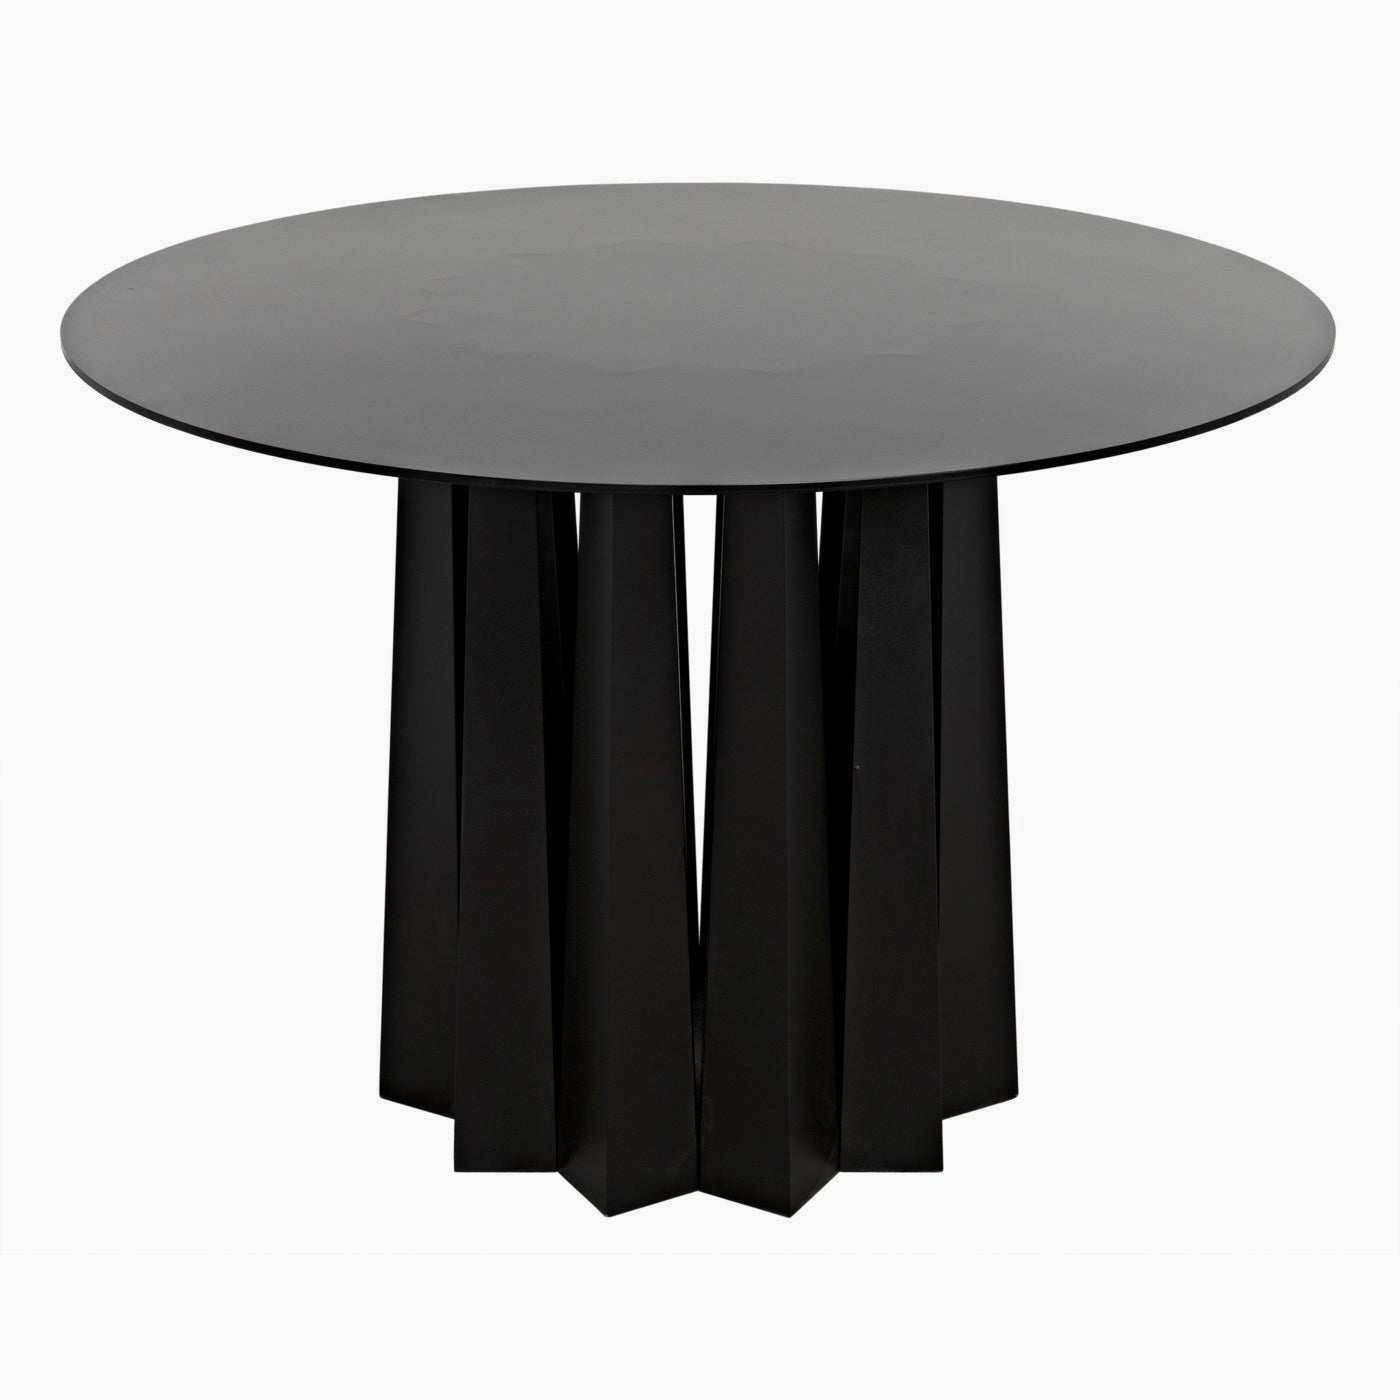 Madelyn Dining Table, Black Steel